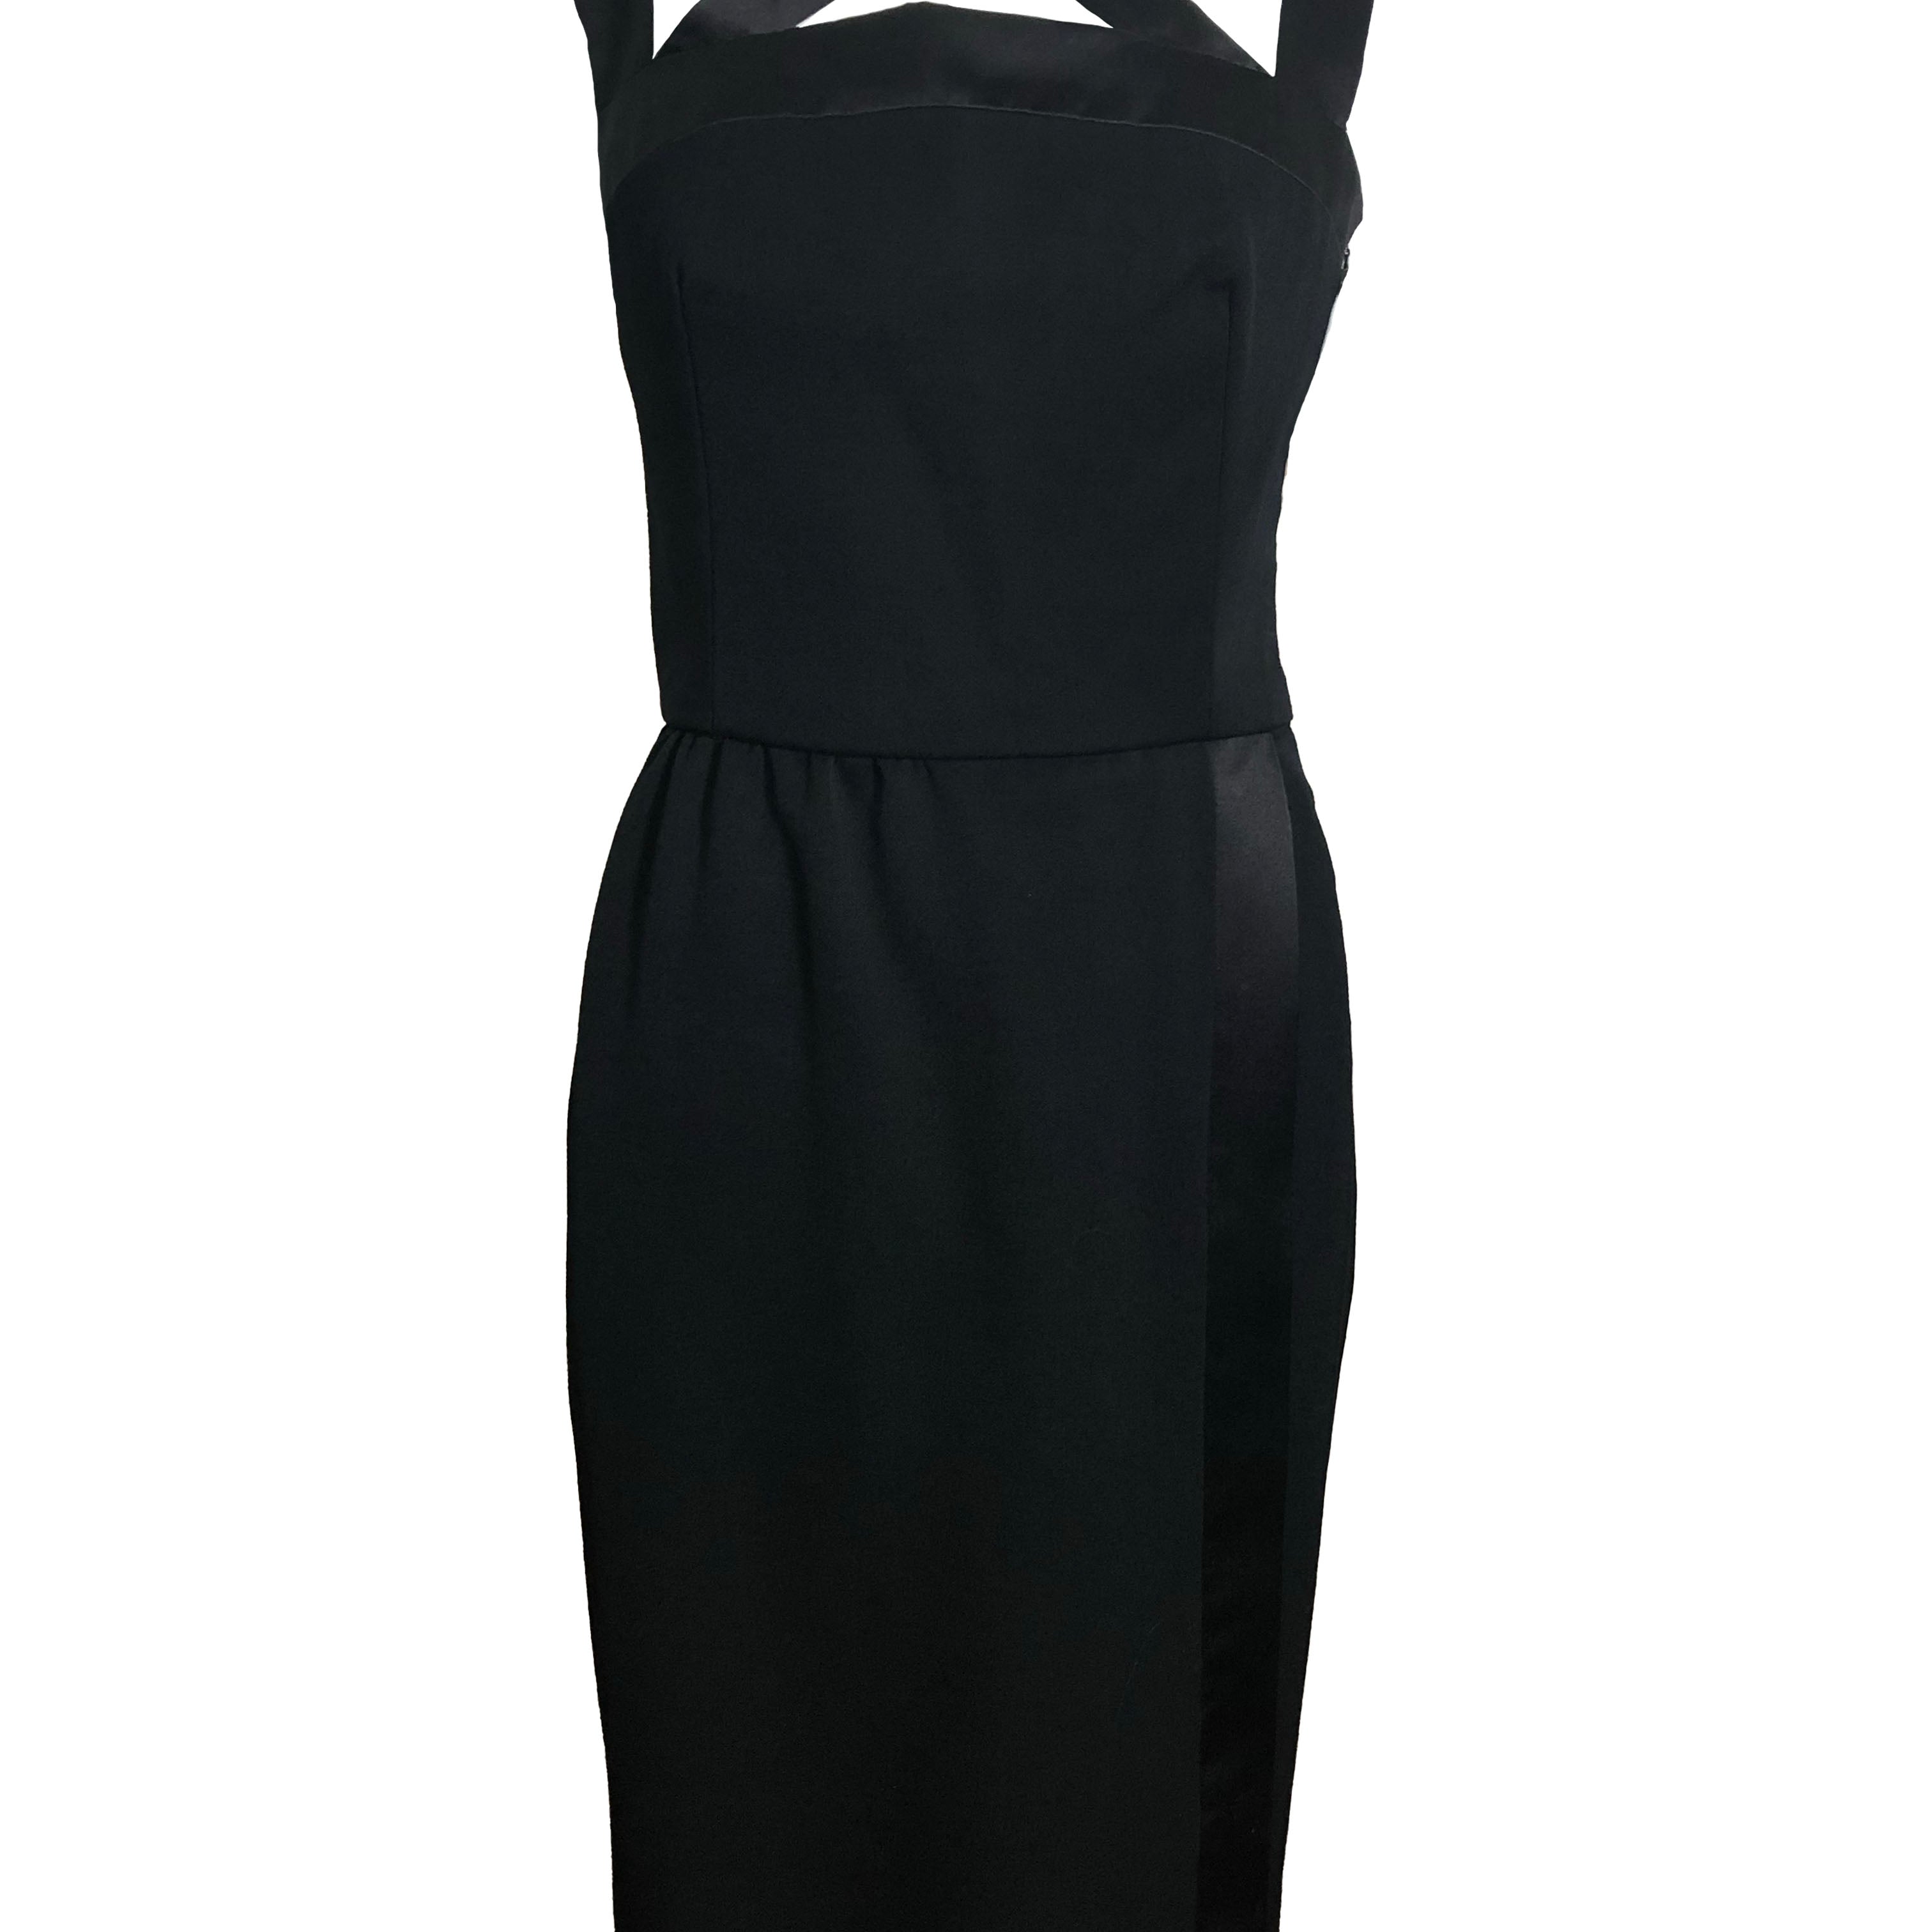 Givenchy Tuxedo Style Cocktail Dress FRONT 1 of 5